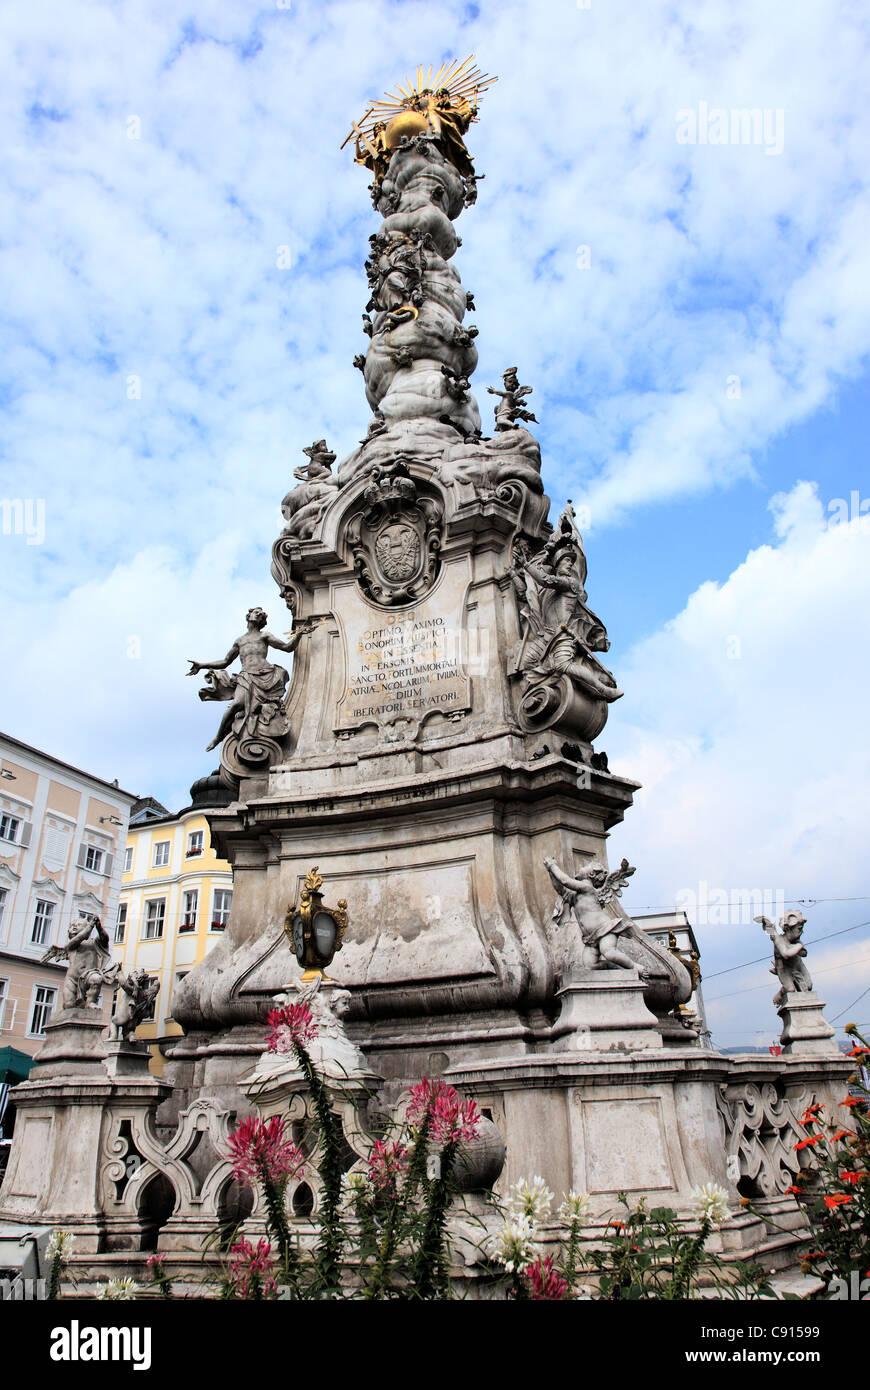 In the Hauptplatz there is an elaborate monument which towers above the square, called the Holy Trinity Monument. Stock Photo